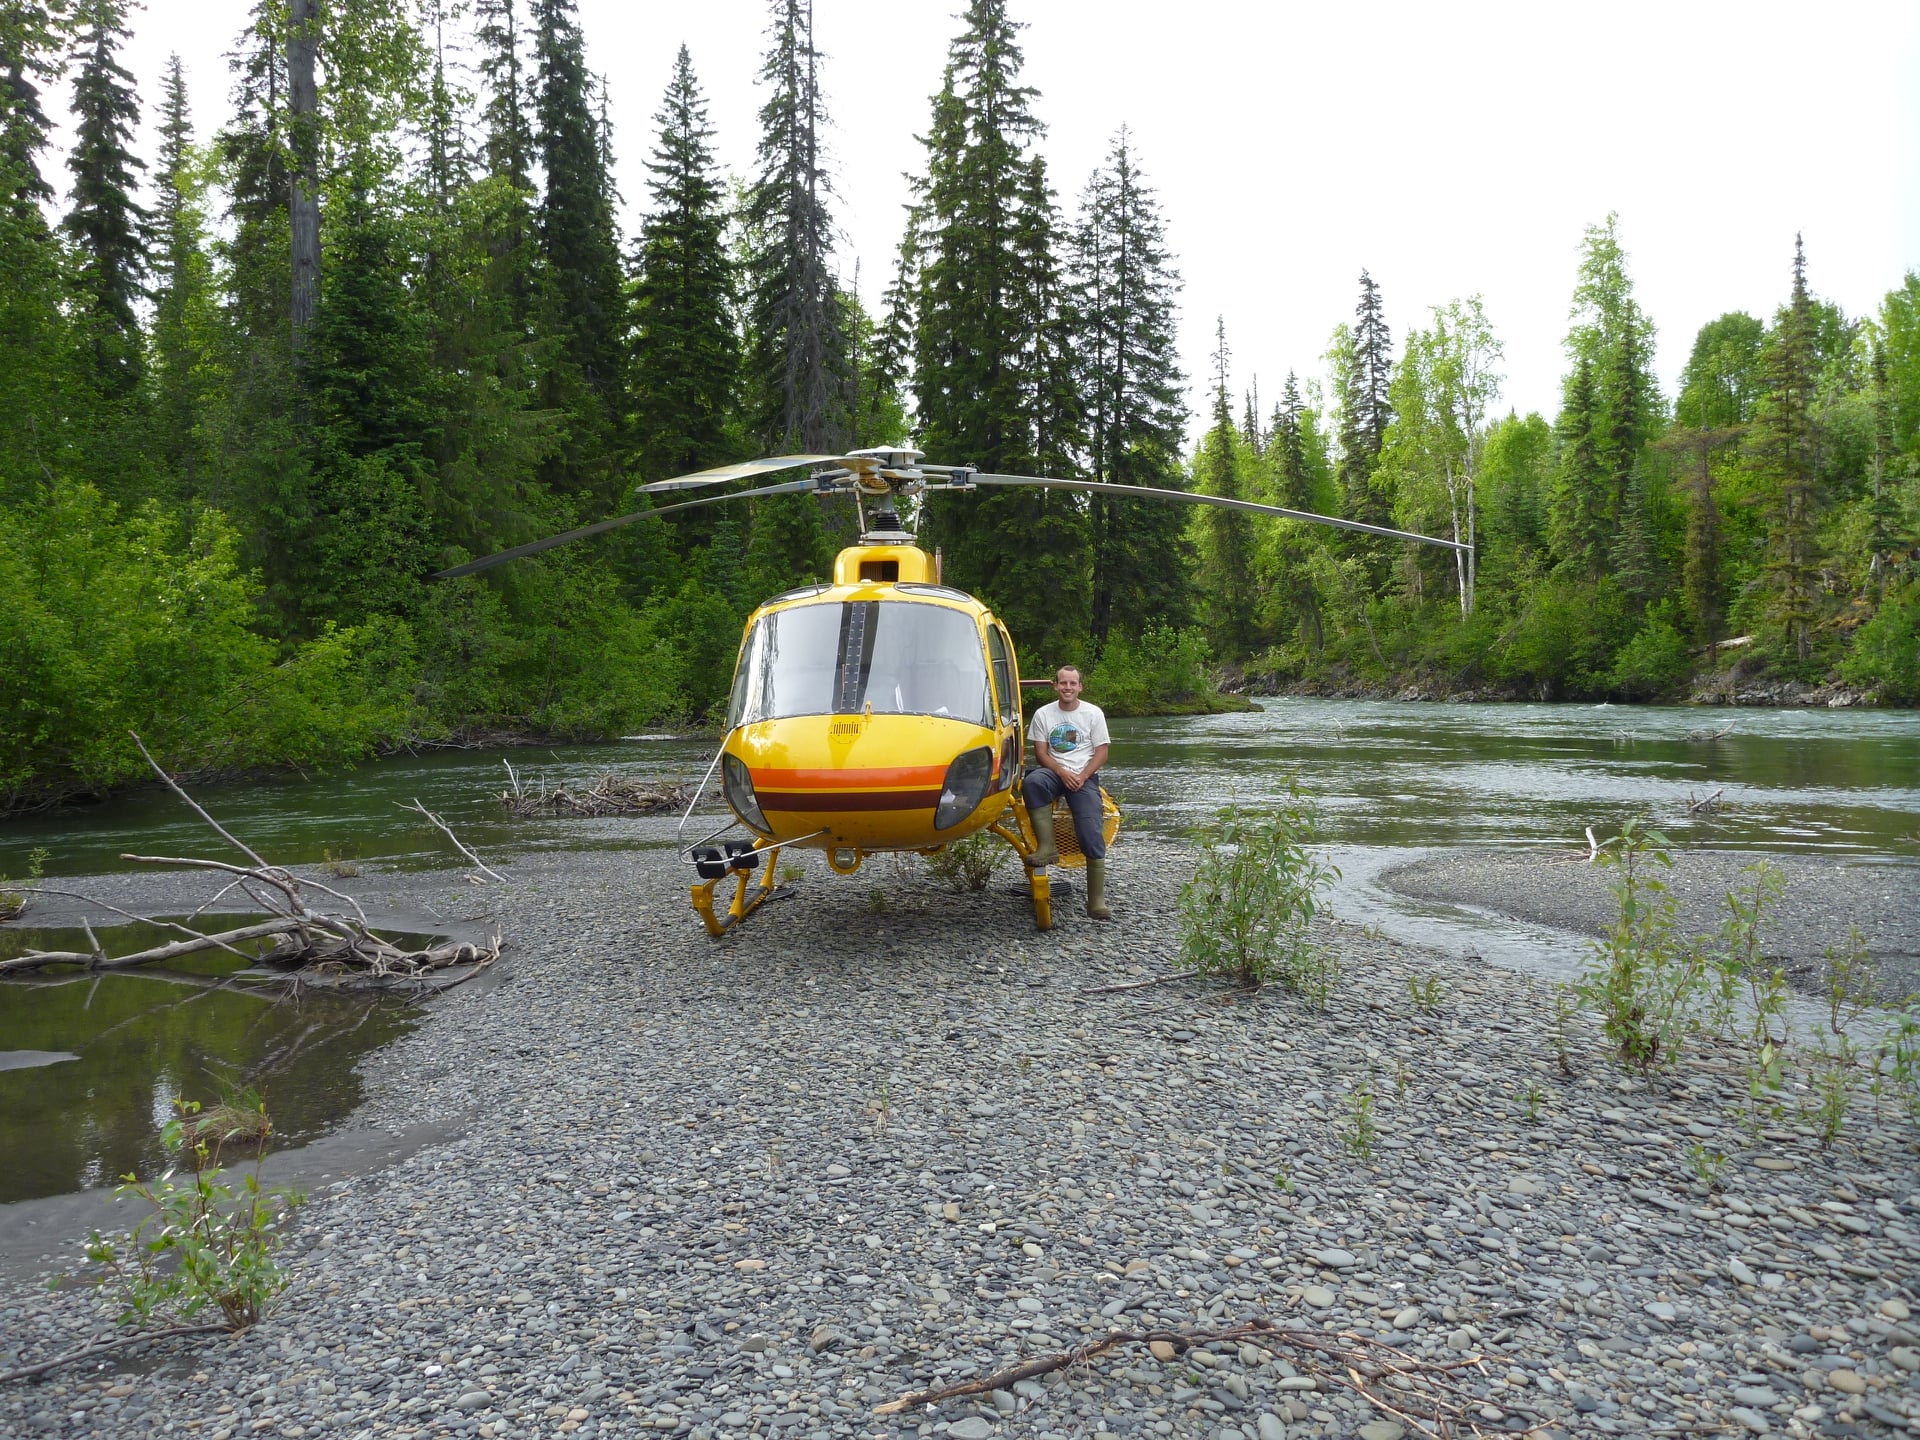 Helicopter and pilot waiting in the forest